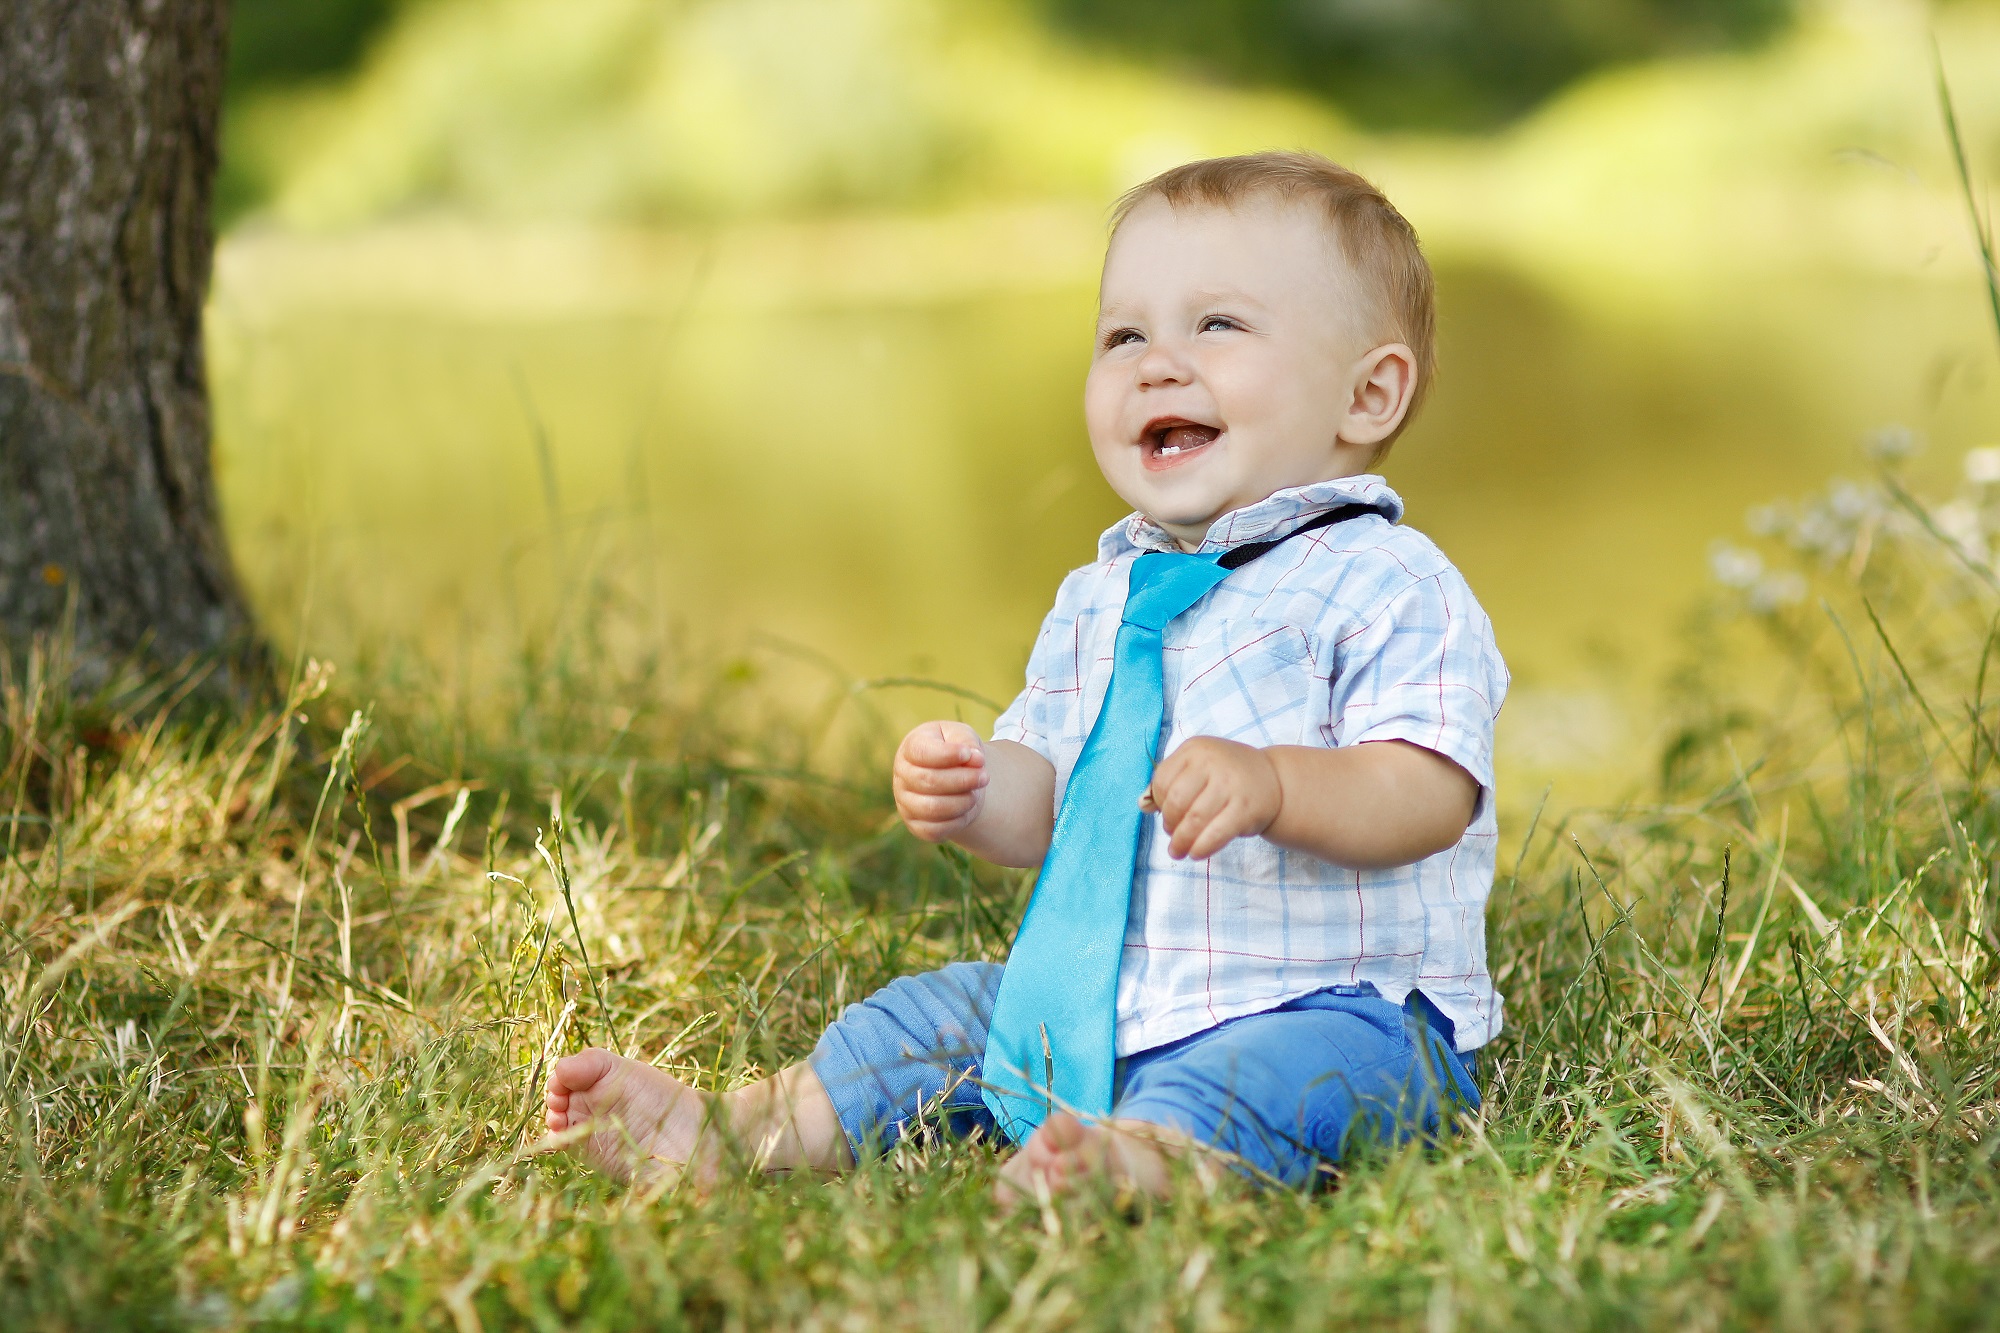 Scottish little toddler boy wearing necktie sitting on the grass and smiling brightly